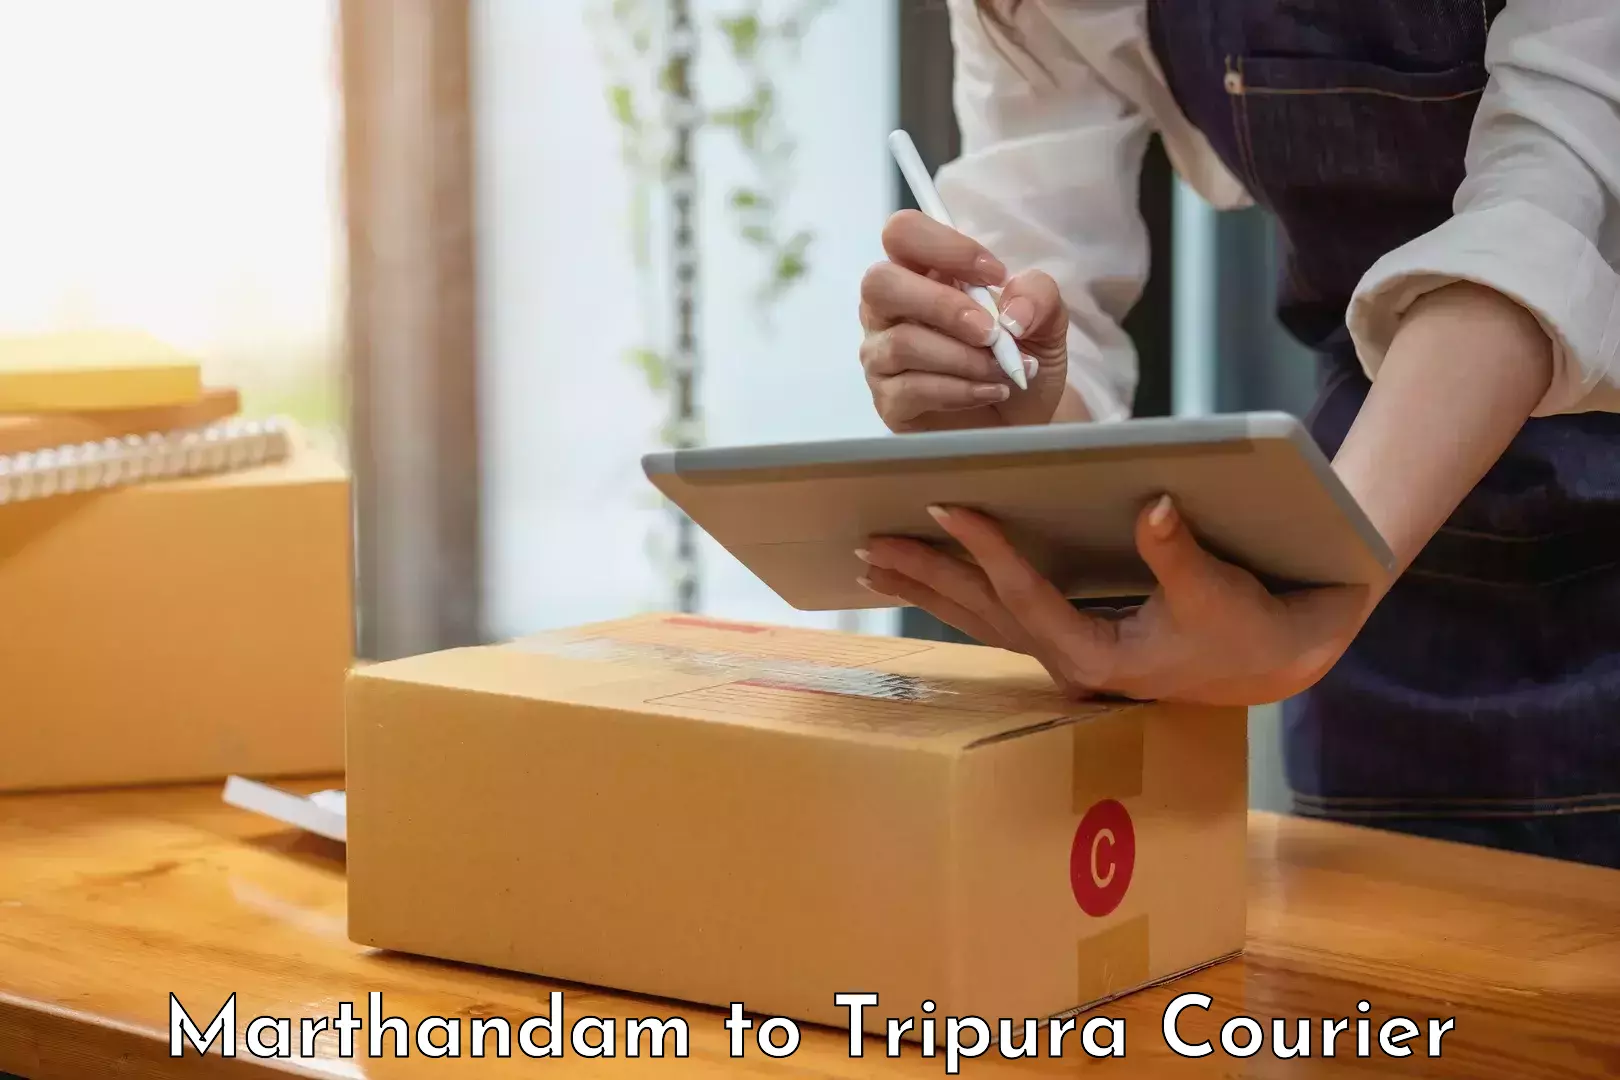 Cost-effective courier options Marthandam to Tripura